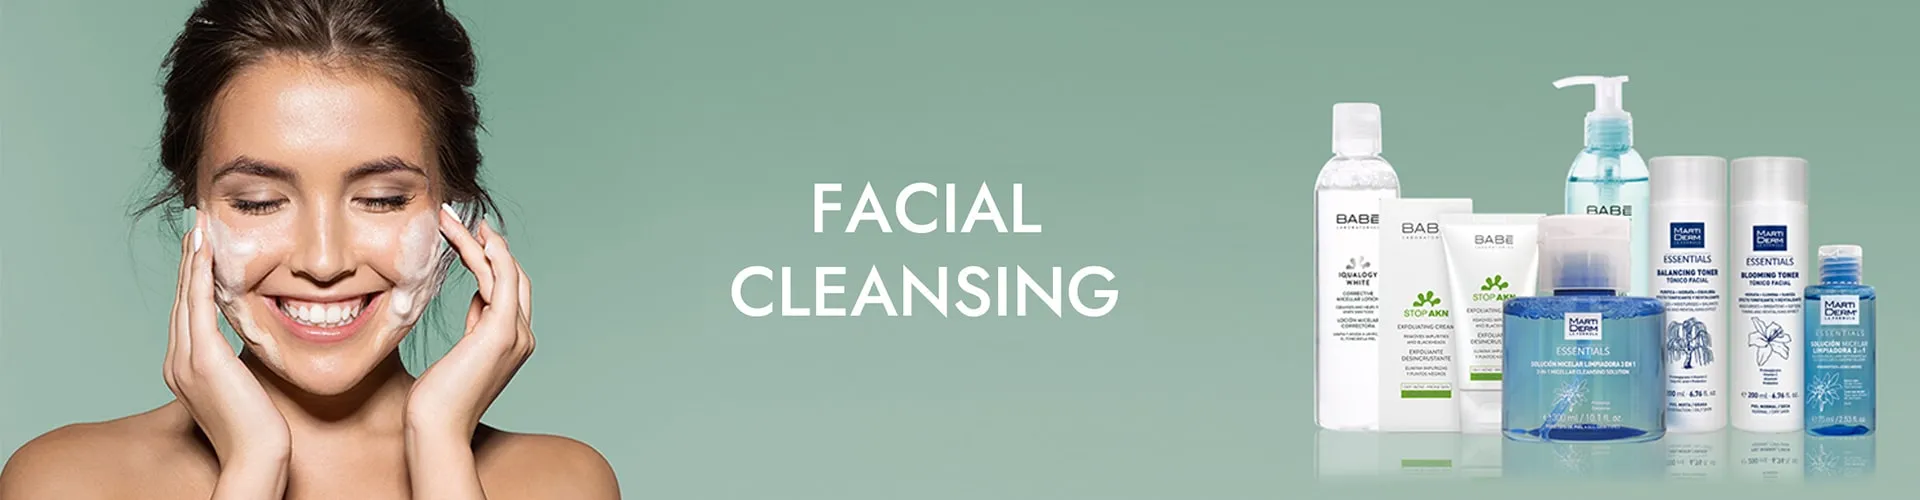 category_facial_cleansing-min